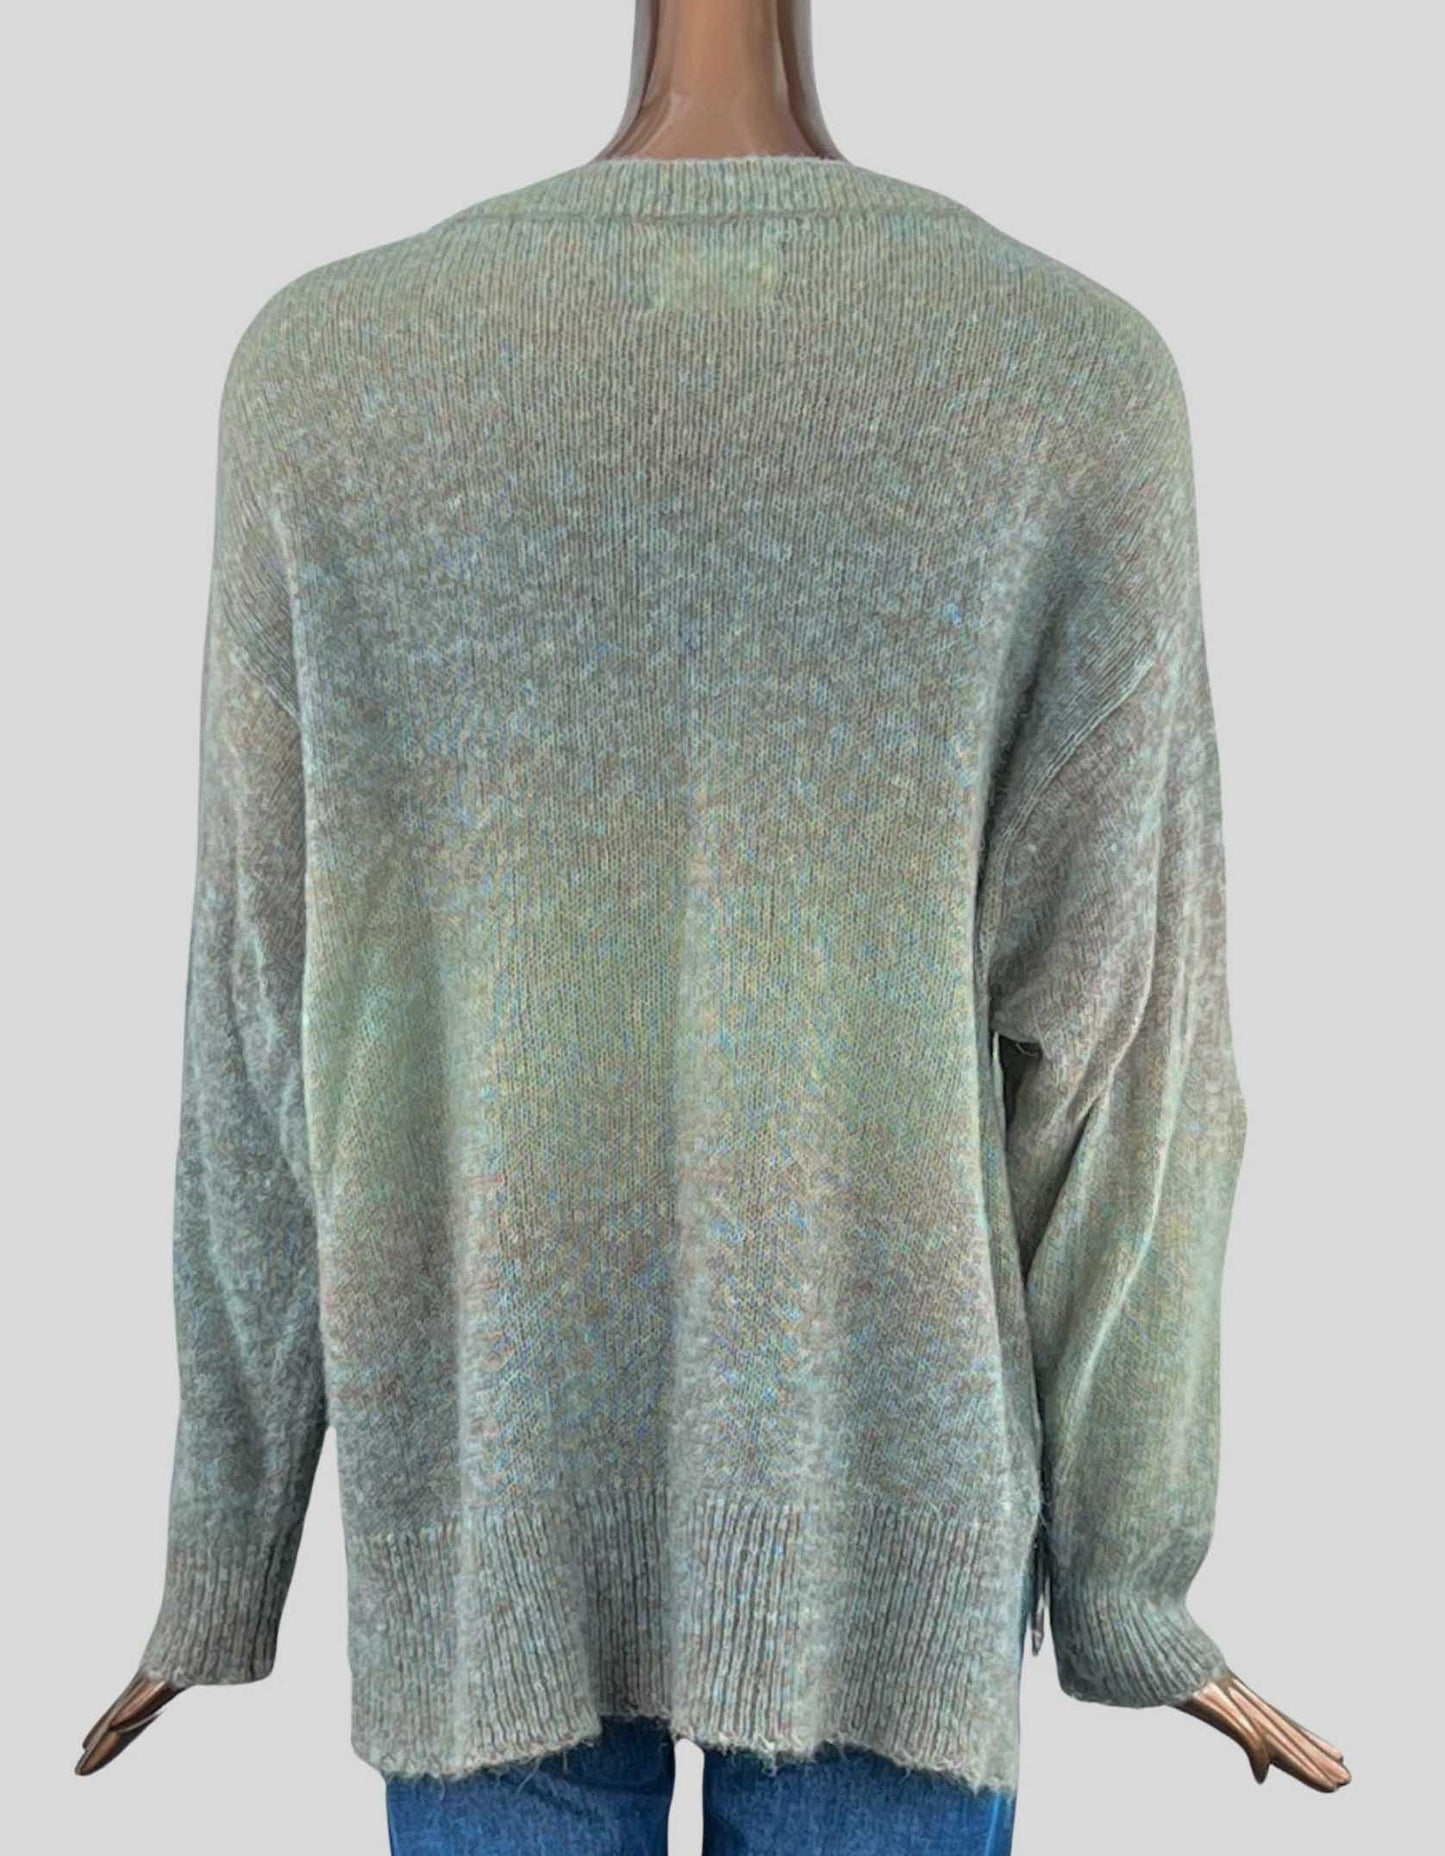 Zadig & Voltaire Sunday Sweater - Small | 4-6 US